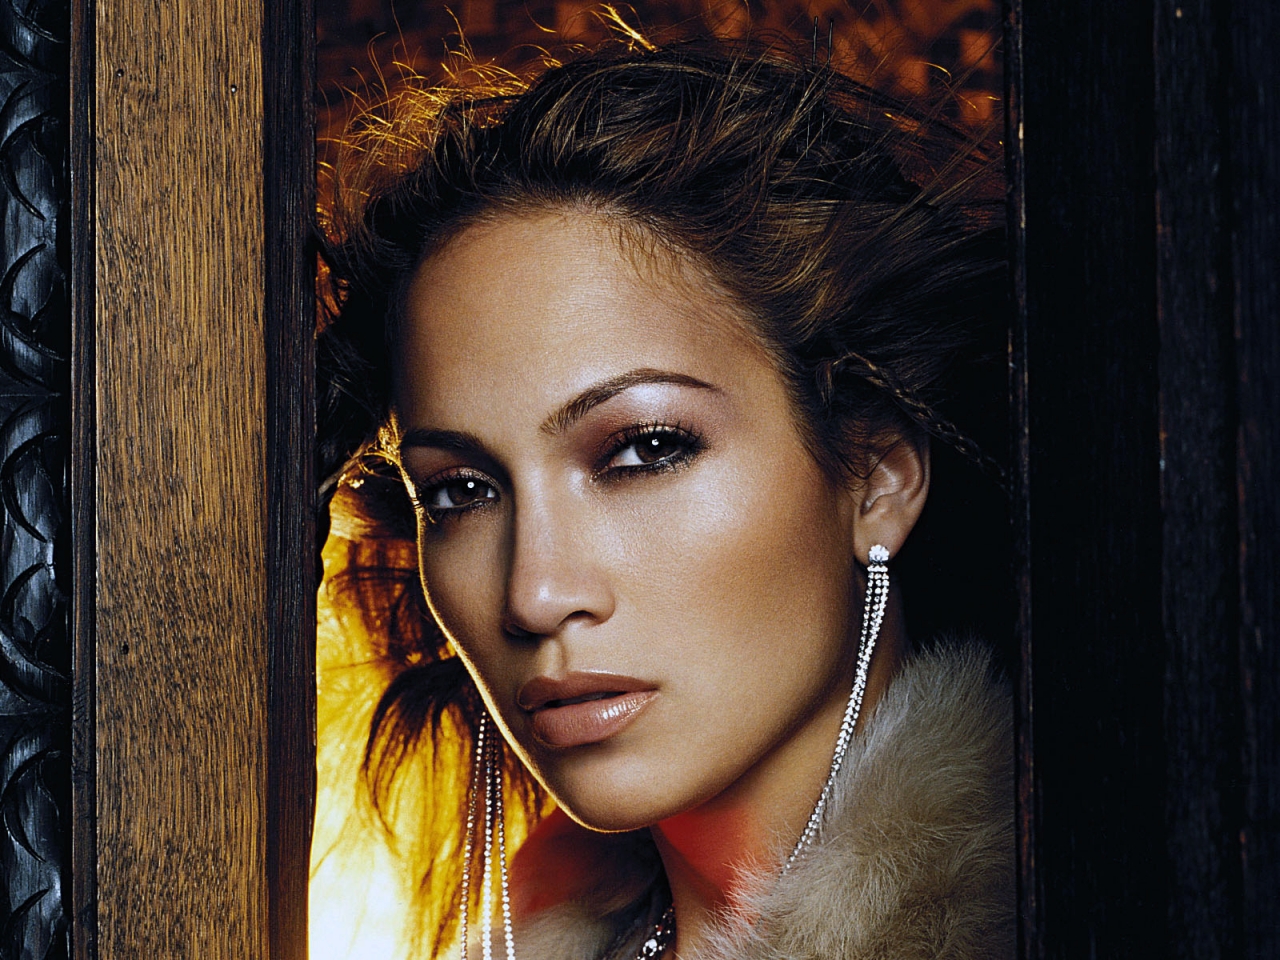 J.Lo for 1280 x 960 resolution